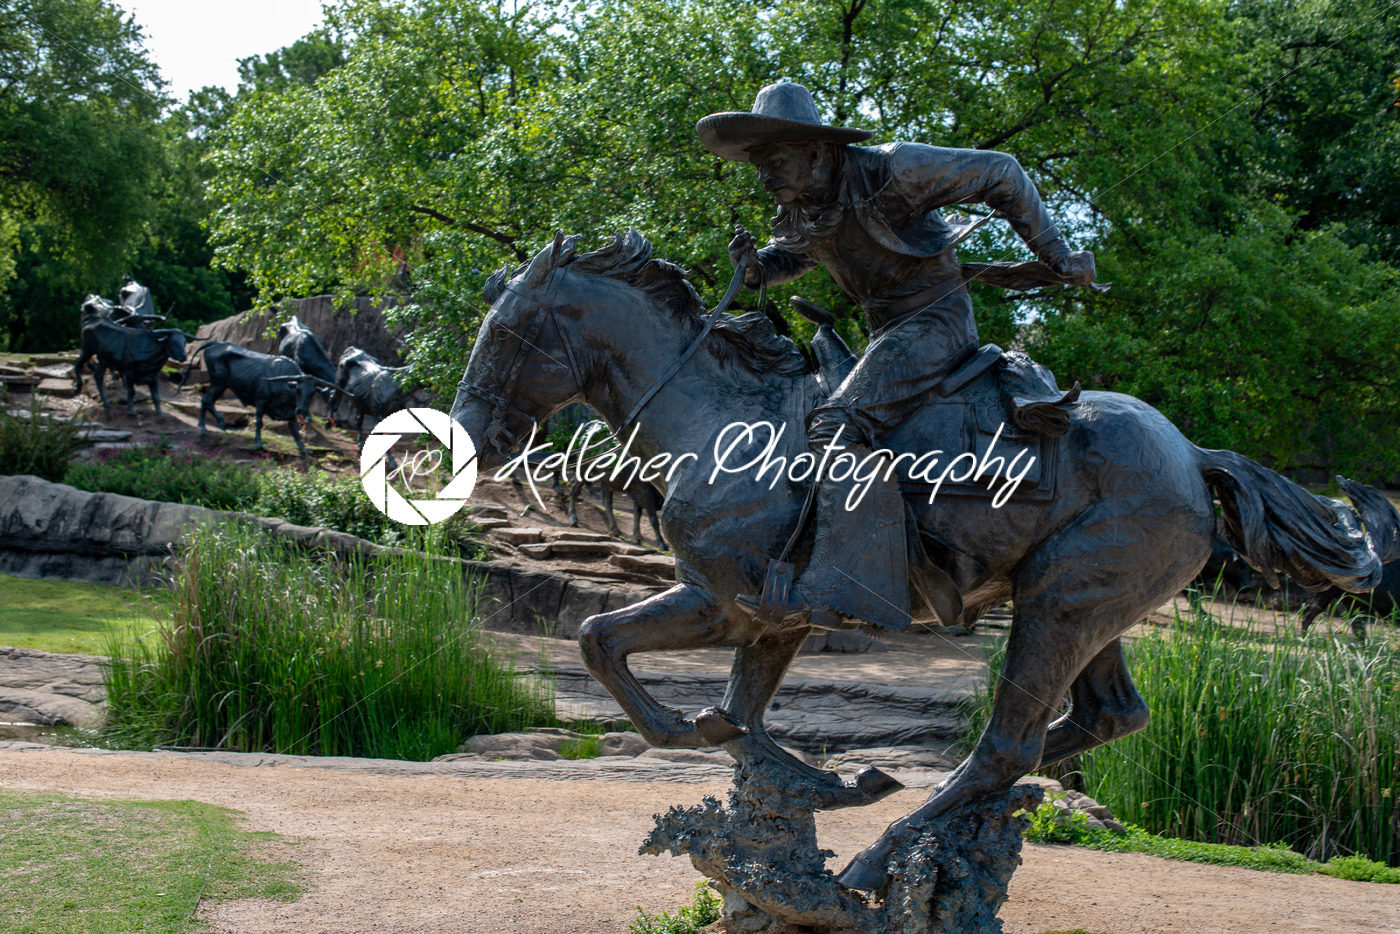 Dallas, Texas – May 7, 2018: Cowboy and longhorn cows with cattle in the background, as part of a landmark bronze cattle sculpture - Kelleher Photography Store